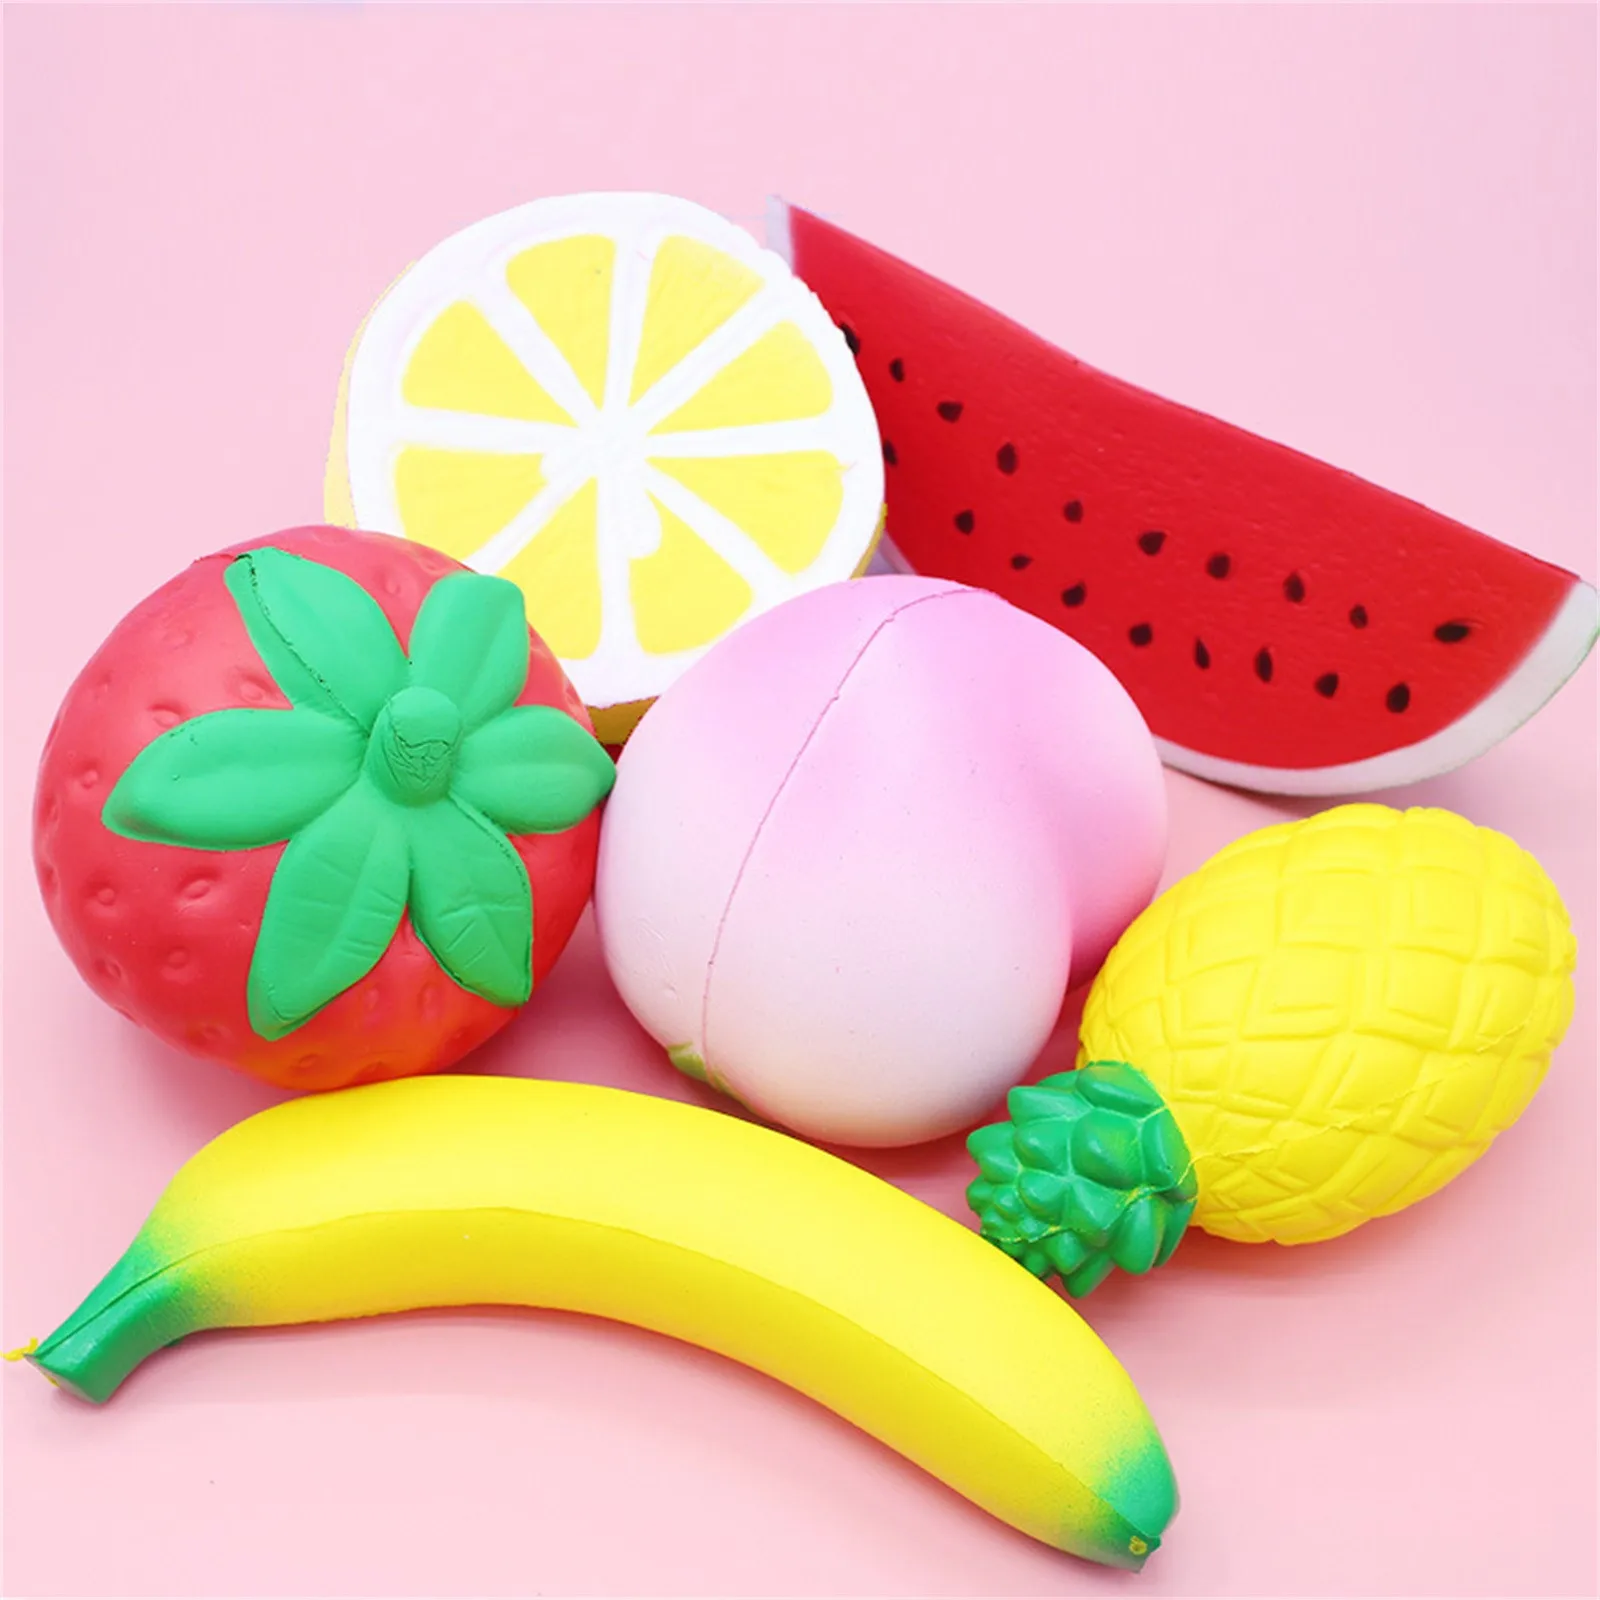 

6pcs Avocado Squishy Fruit Package Peach Watermelon Banana Cake Squishies Slow Rising Scented Squeeze Toy Educational Toys